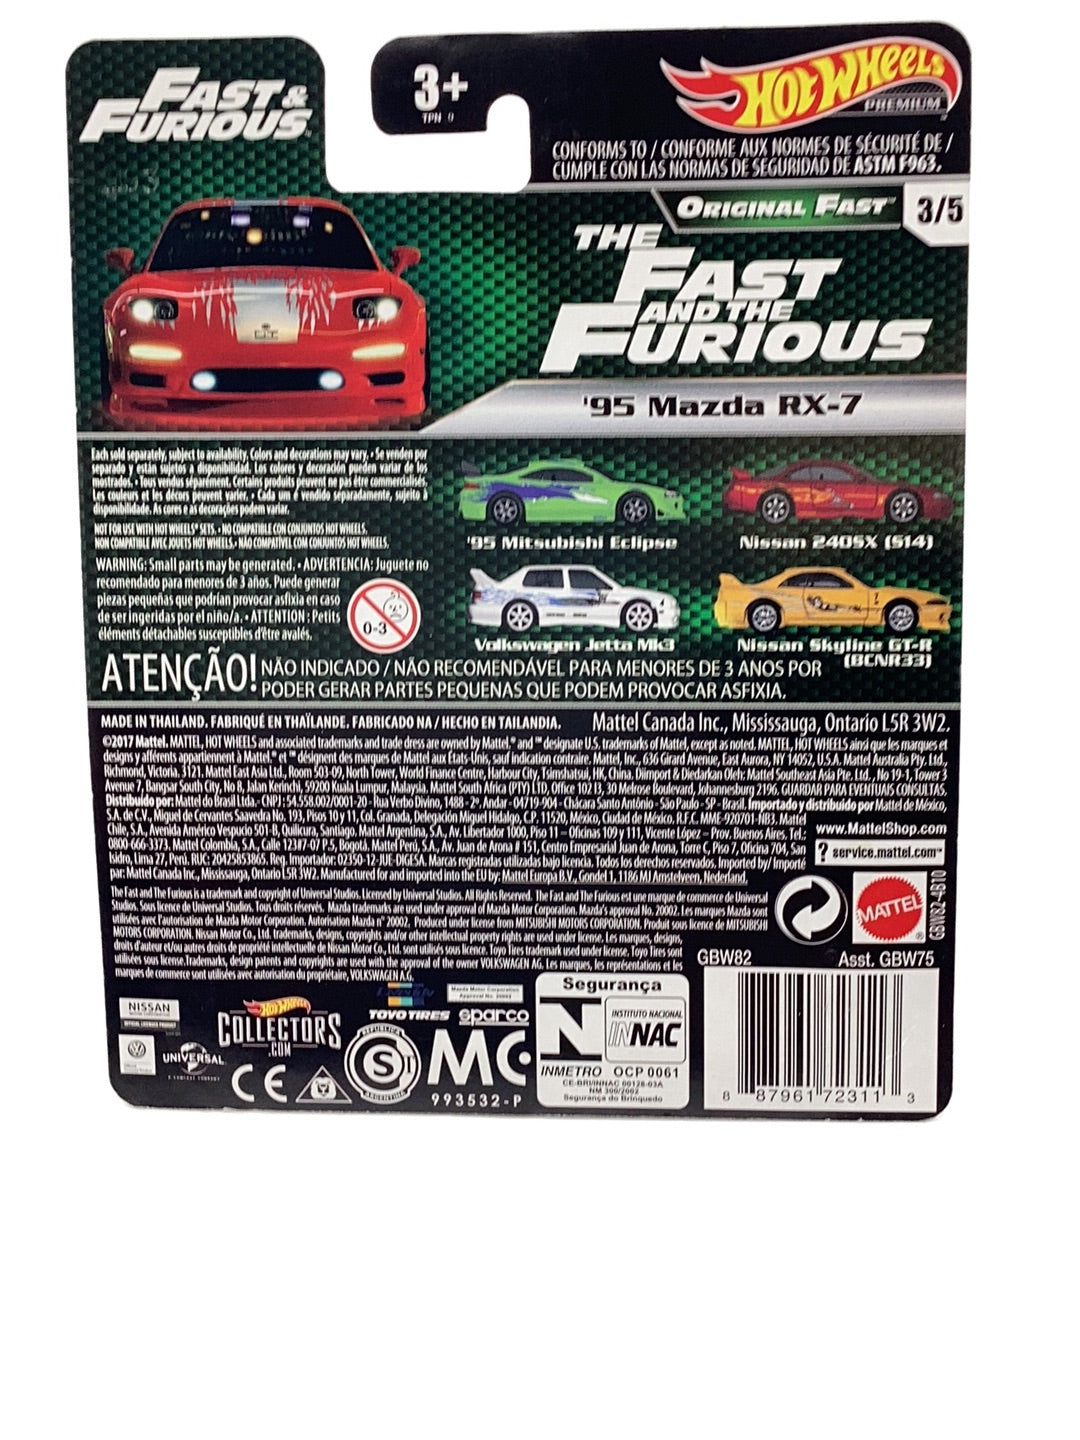 Hot wheels premium fast and furious Original Fast 3/5 95 Mazda RX-7 with protector